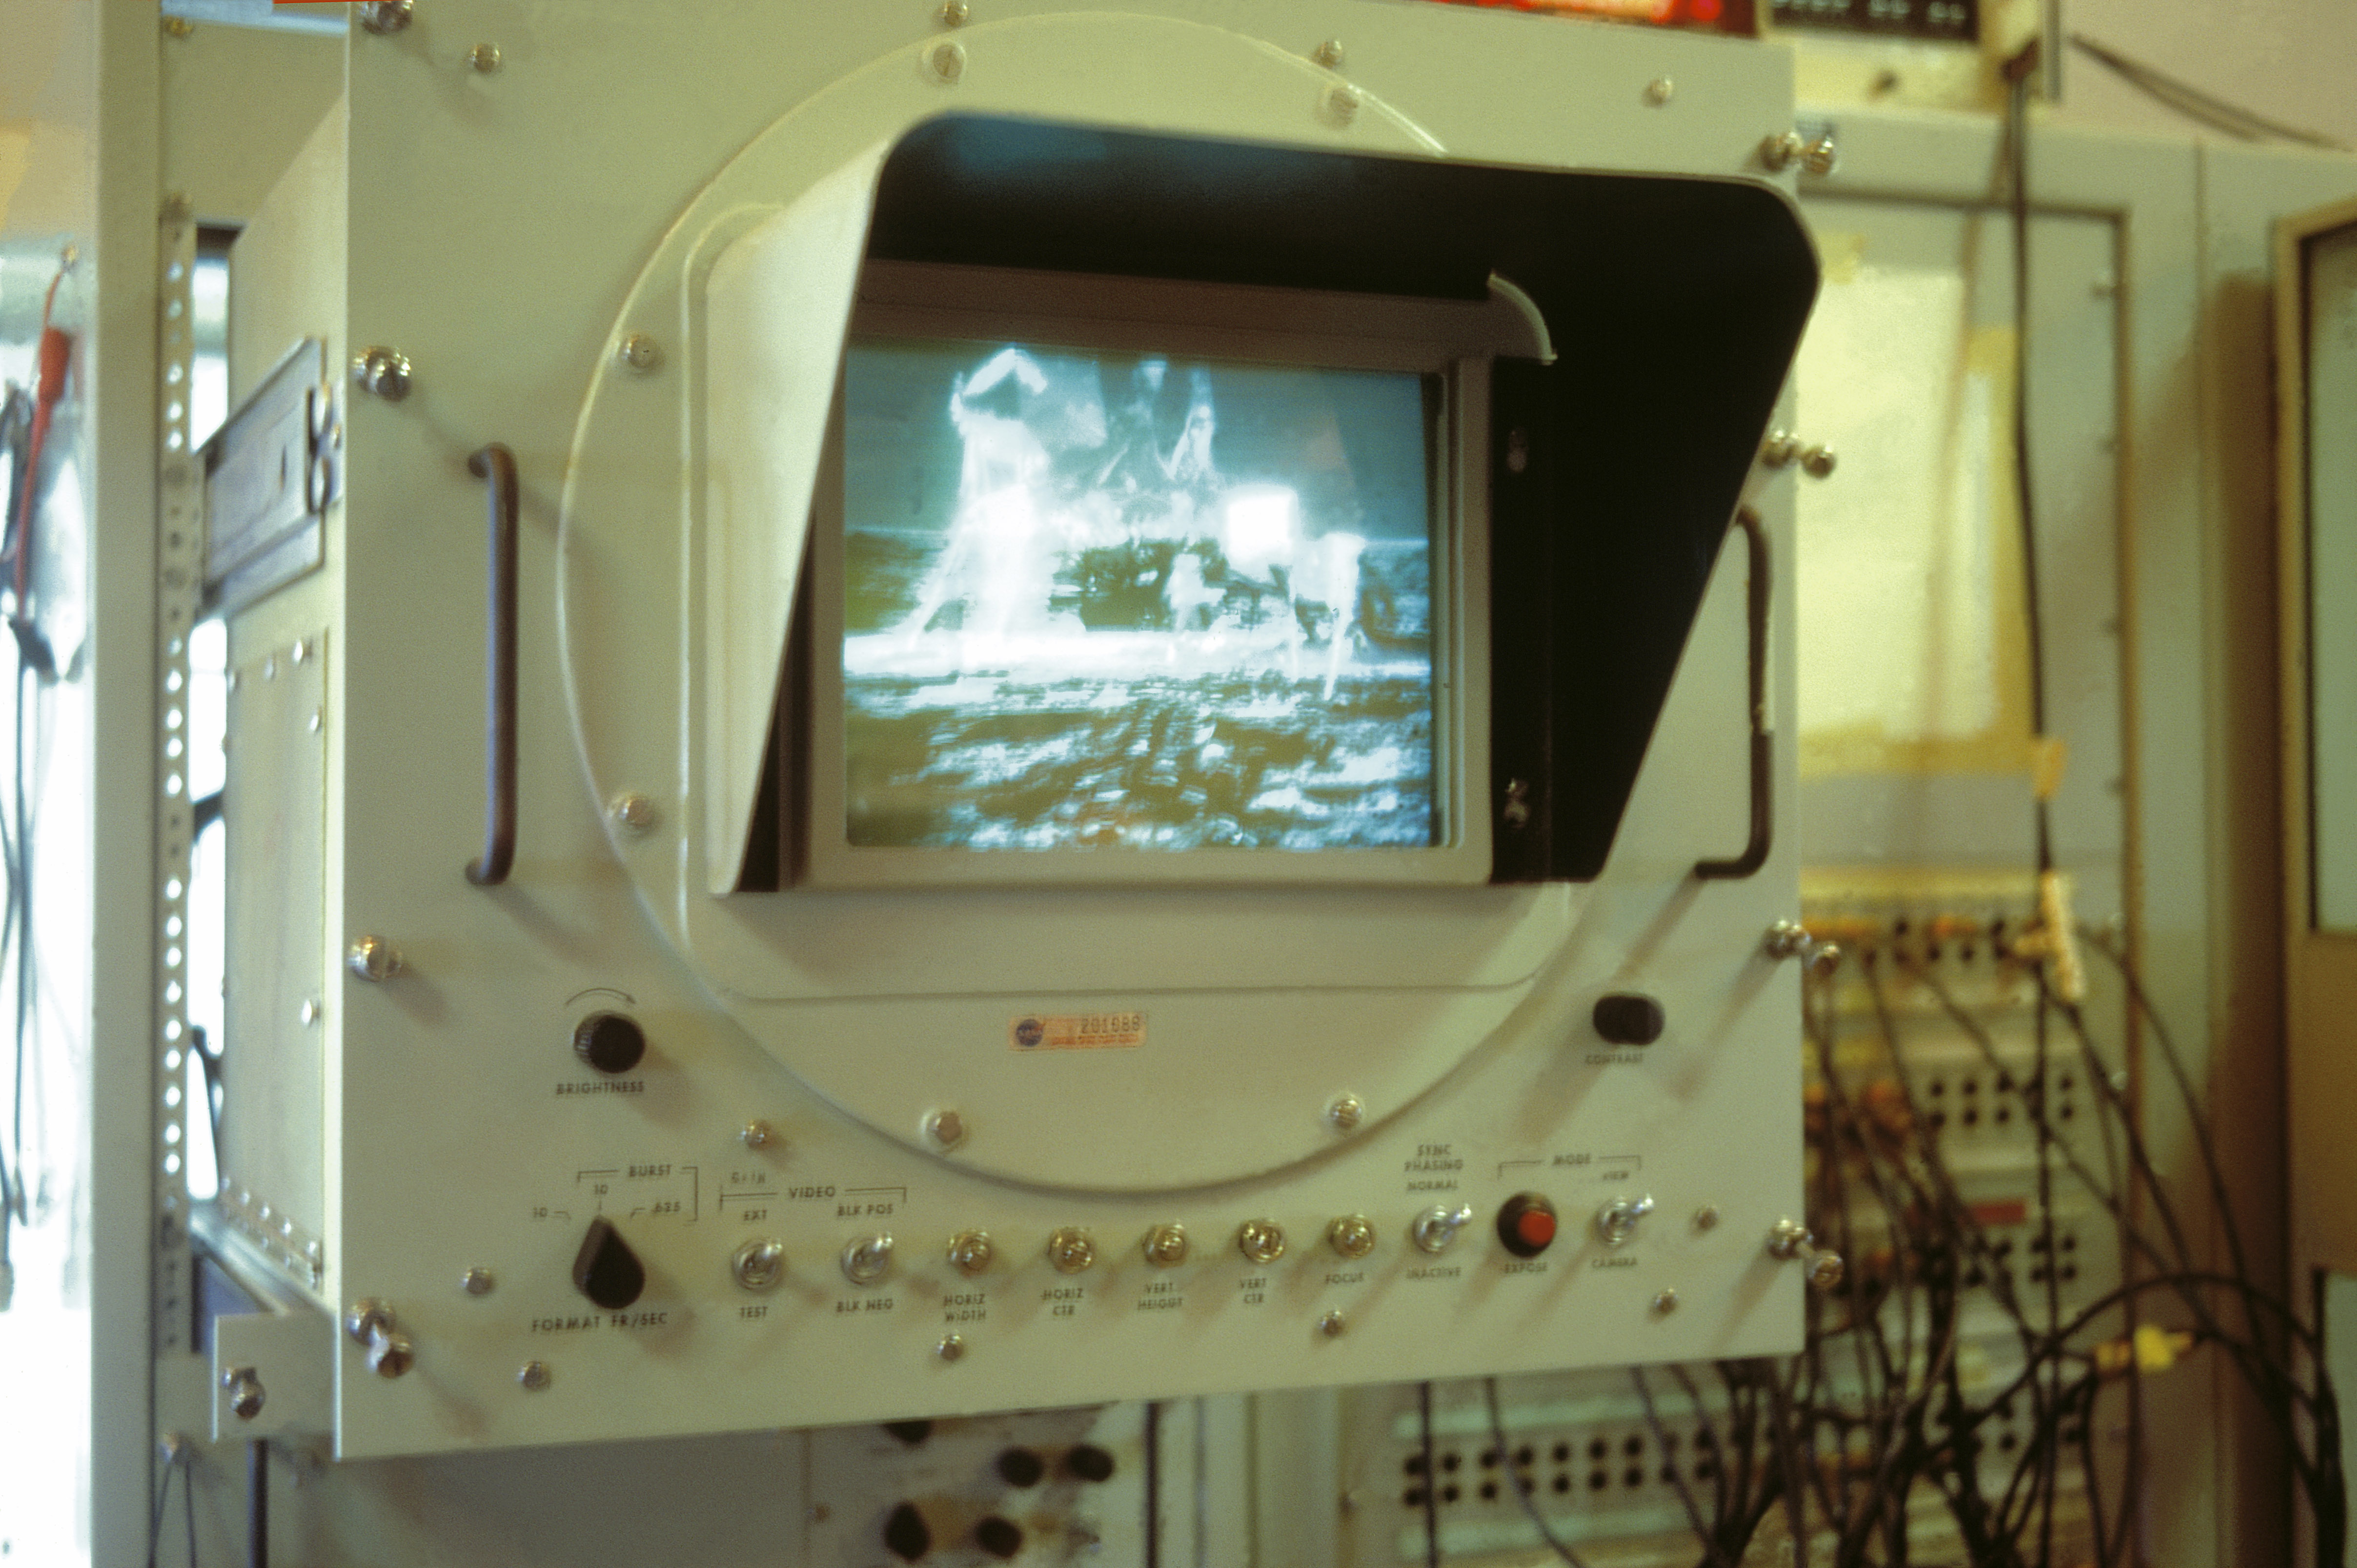 A monitor in the Parkes control room shows the historic moonwalk as it’s received from the Moon